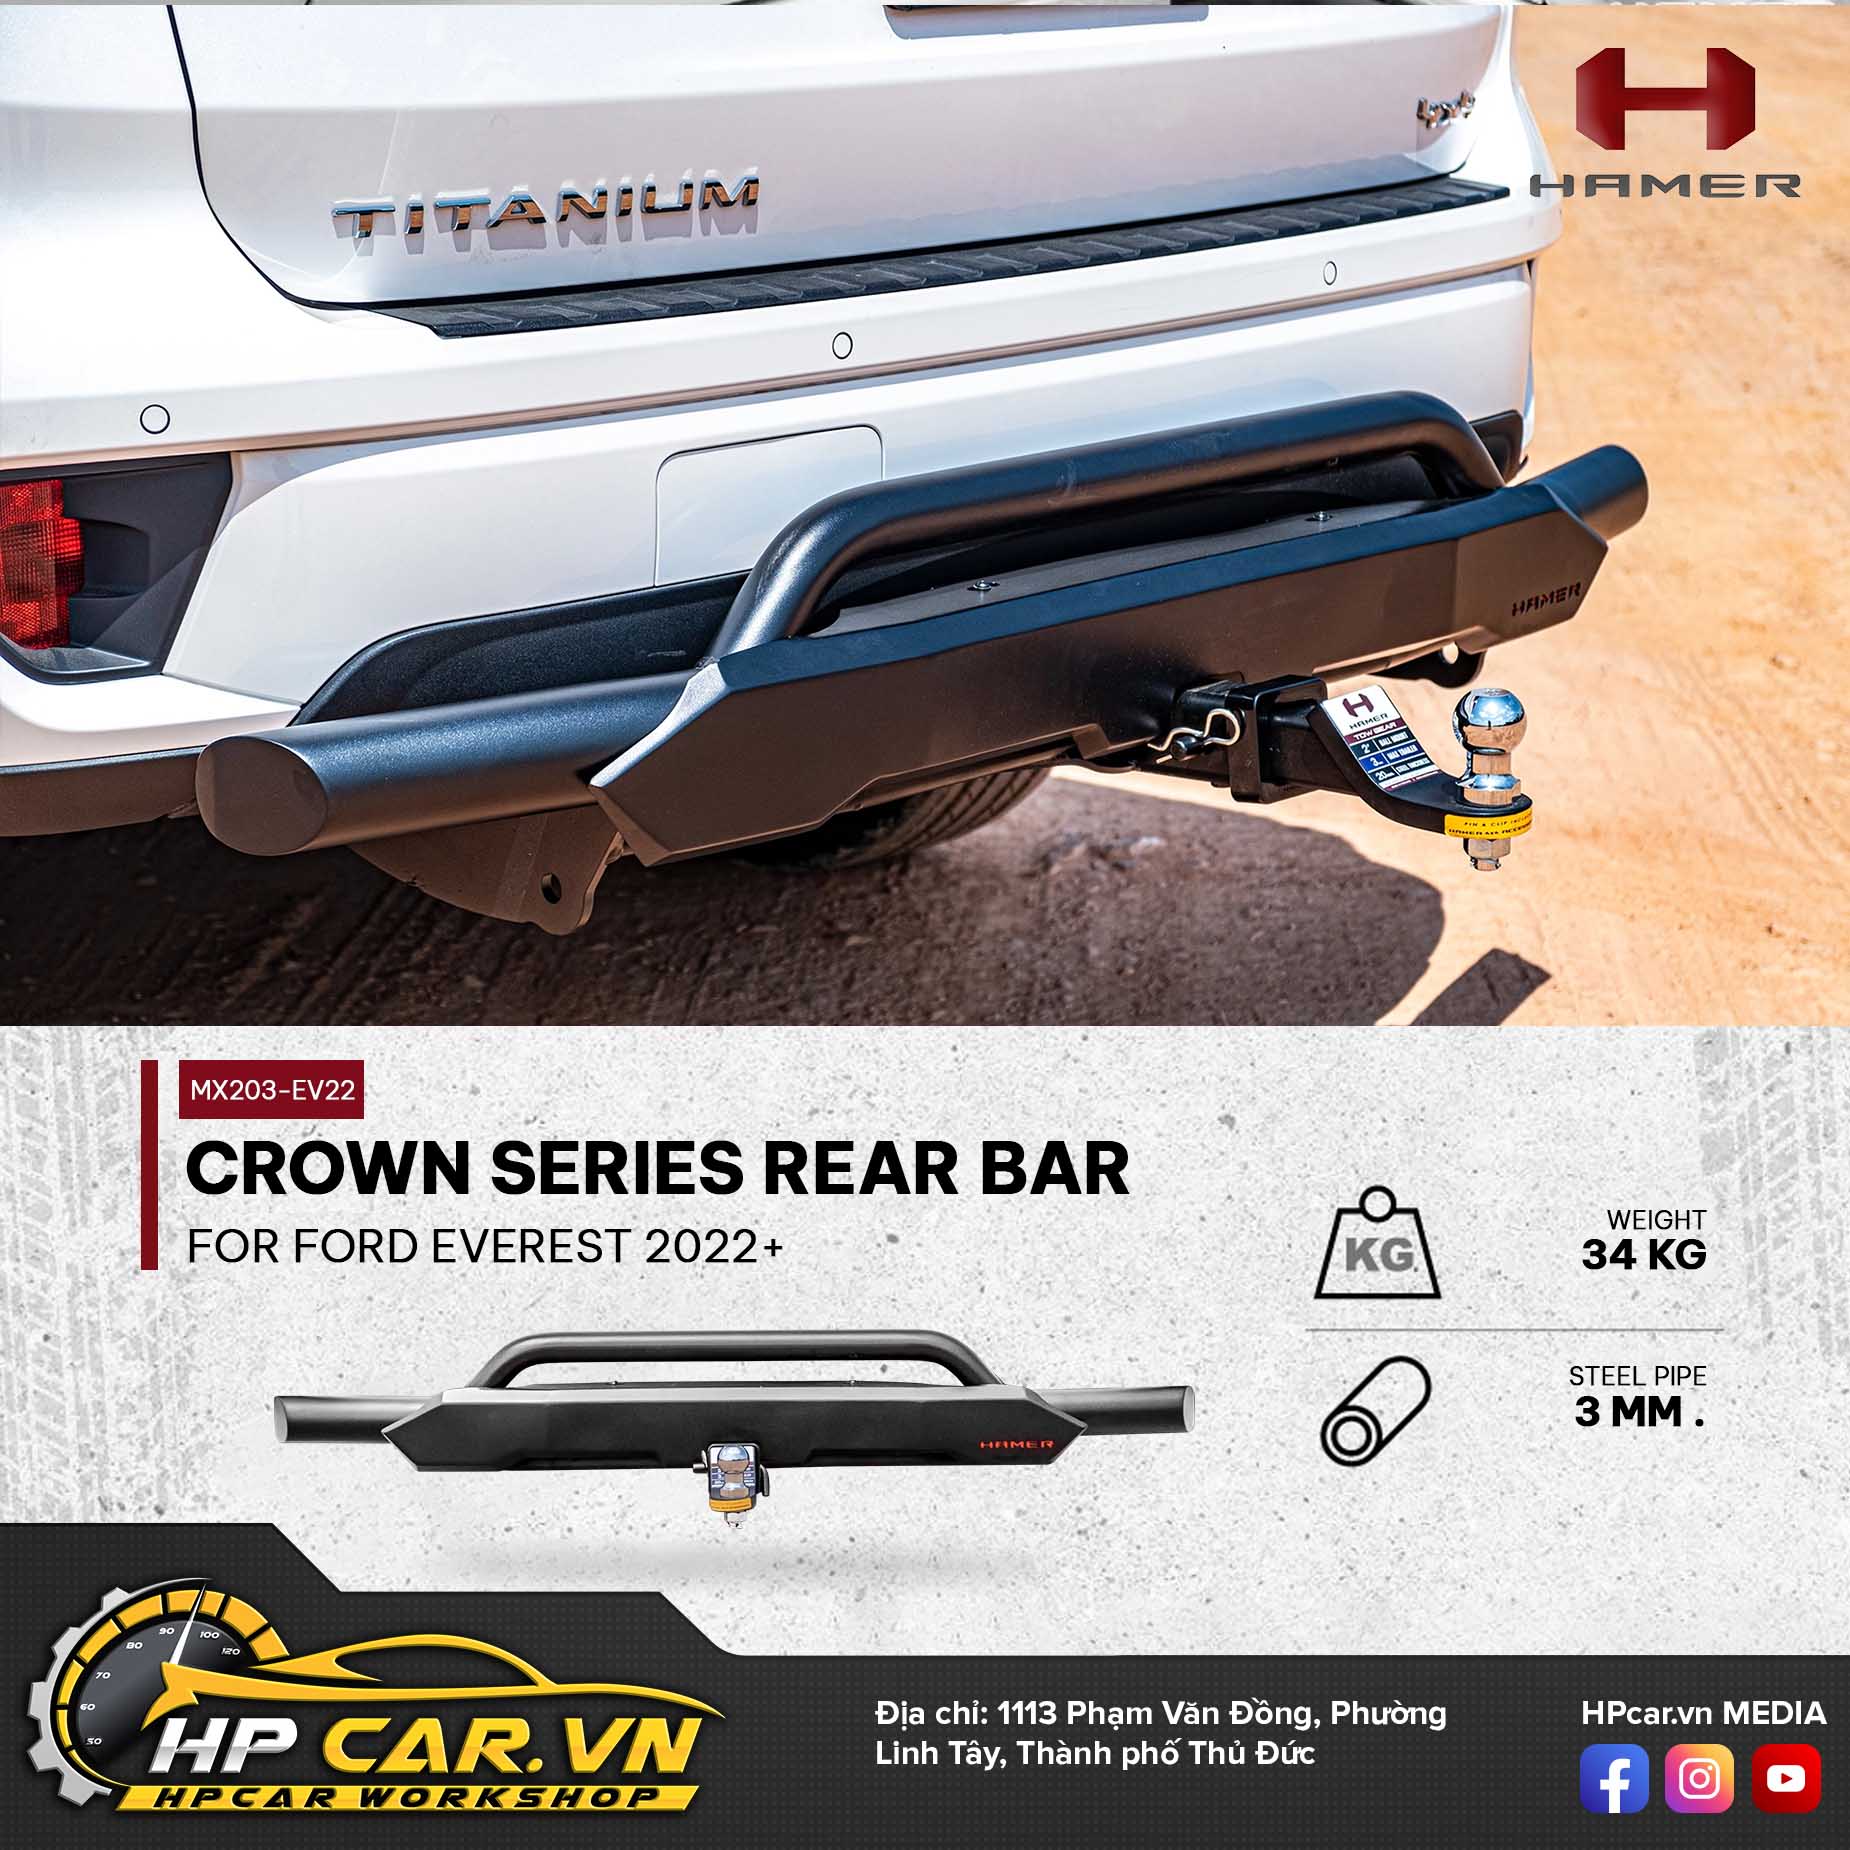 crown series rear bar for ford everest 2022 hpcar